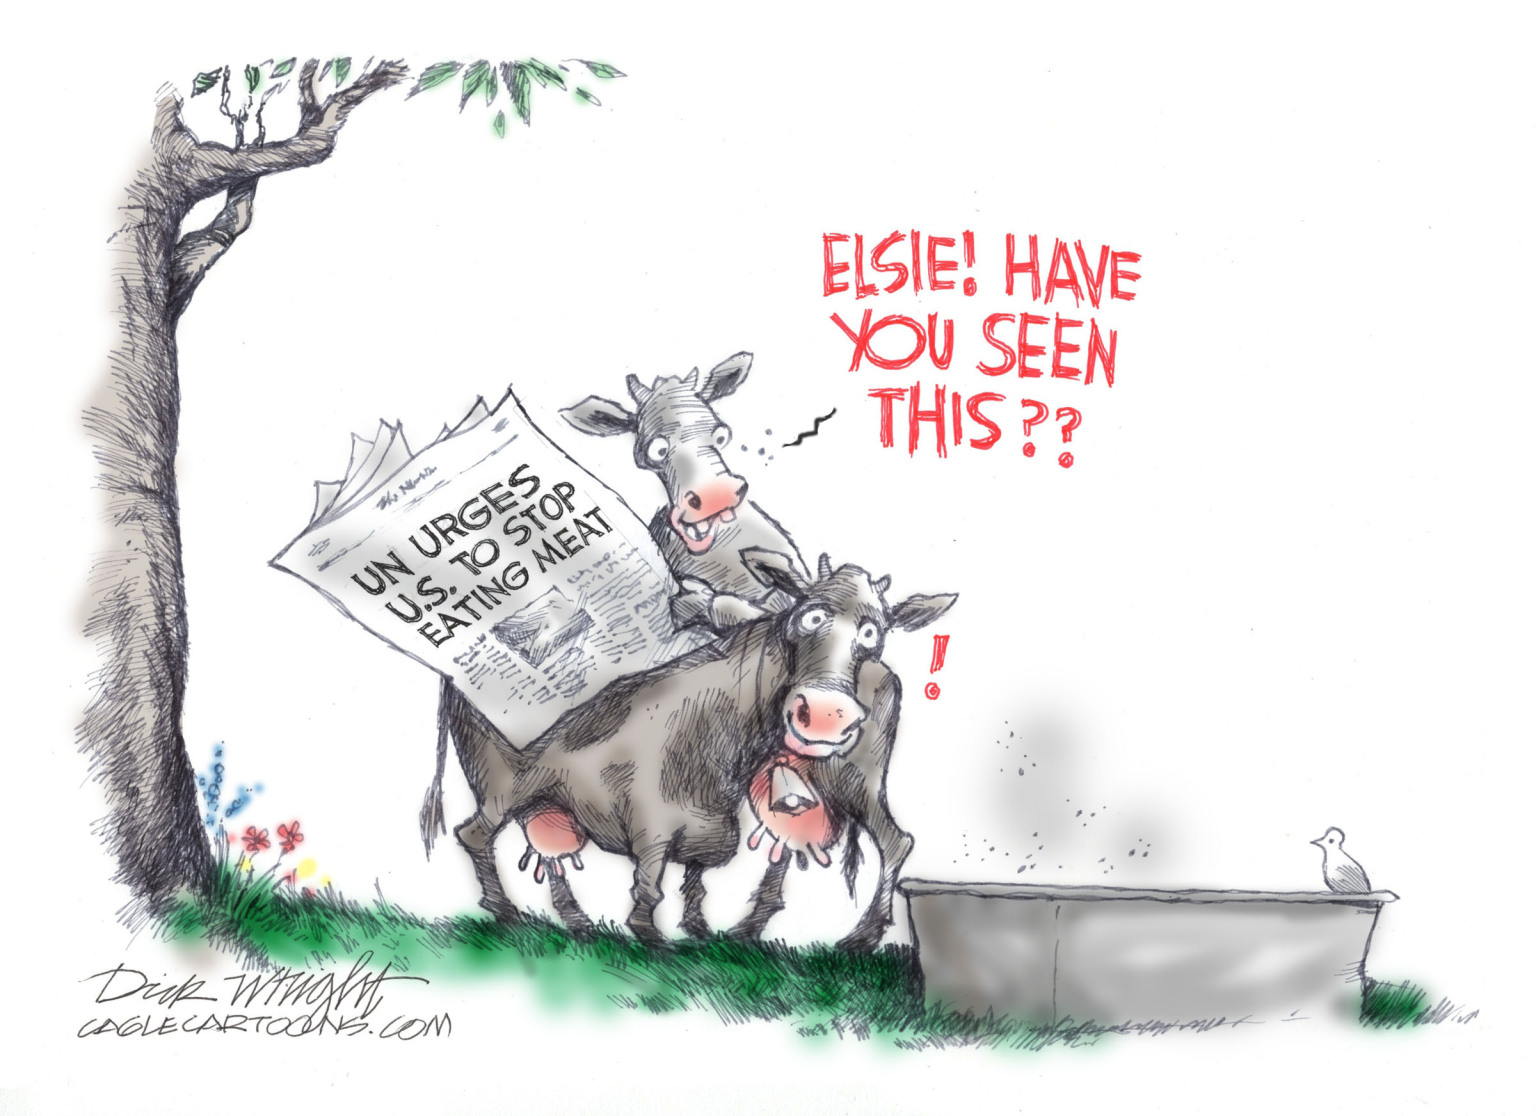 UN and Beef - By Dick Wright